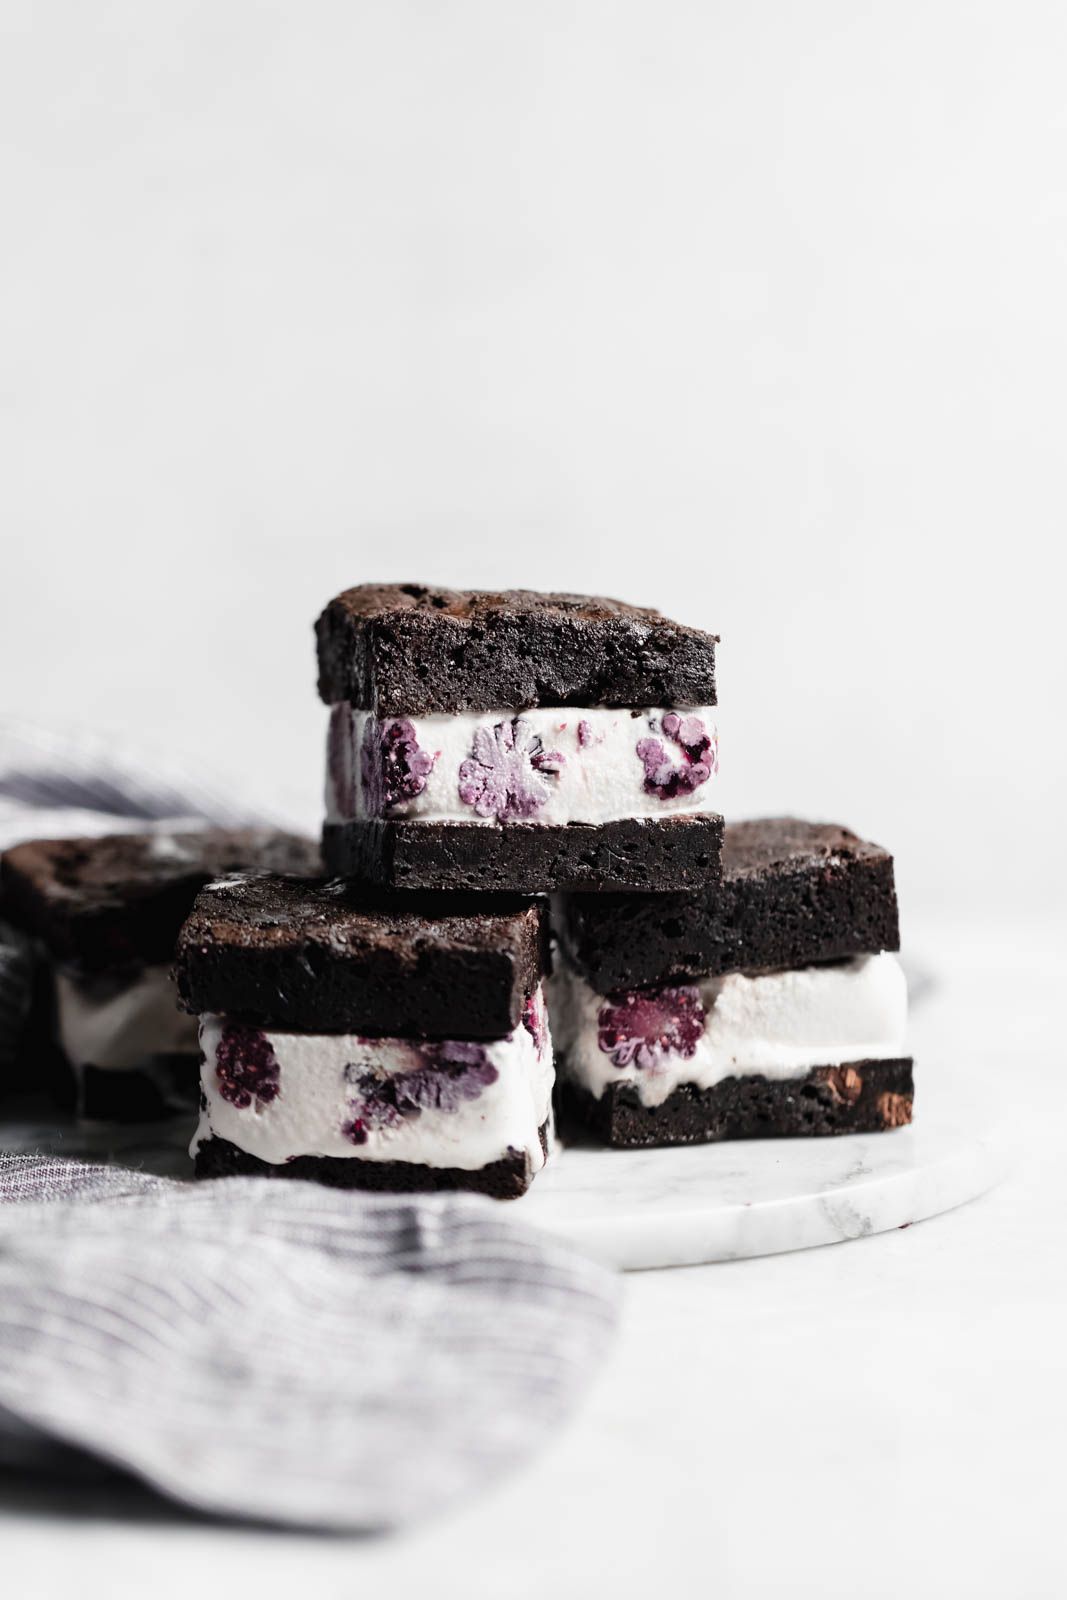 Brownie Ice Cream Sandwiches are the new thing. Made with boxed brownies and store-bought vanilla ice cream mixed with blackberry purée!